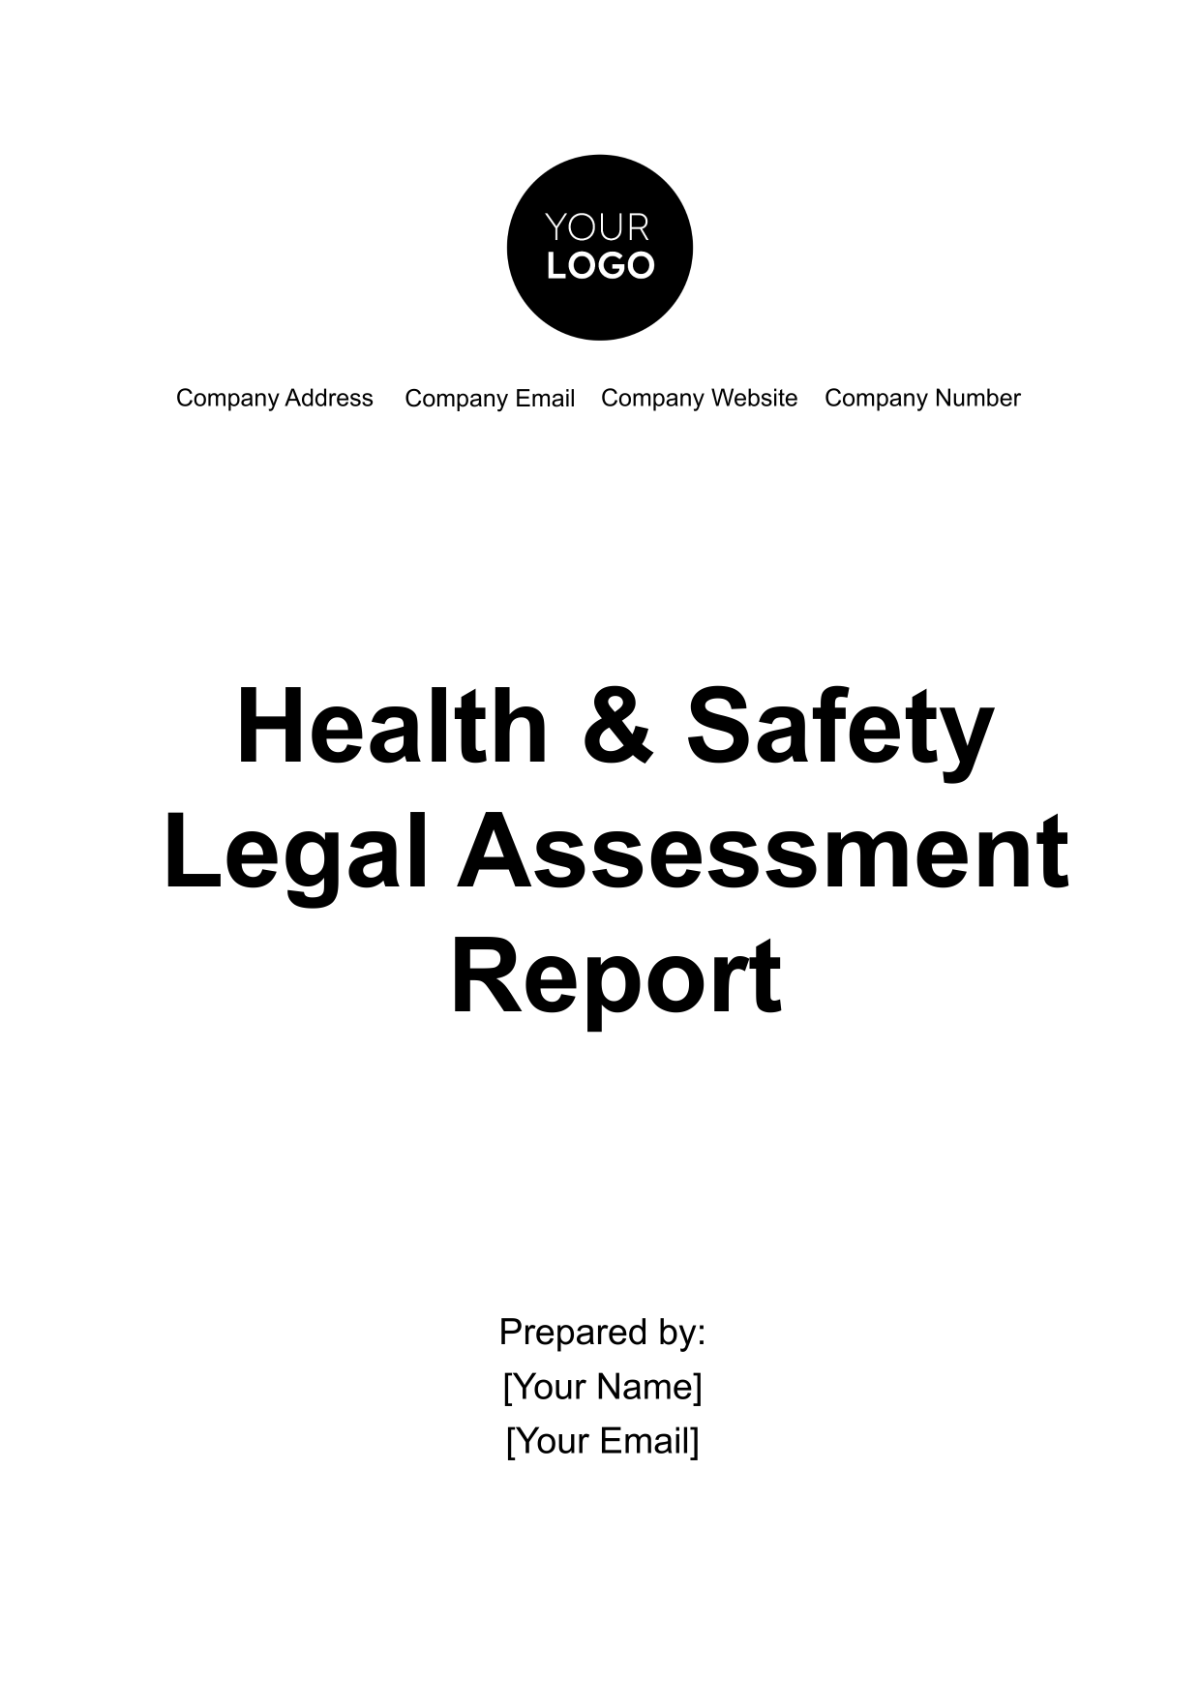 Free Health & Safety Legal Assessment Report Template